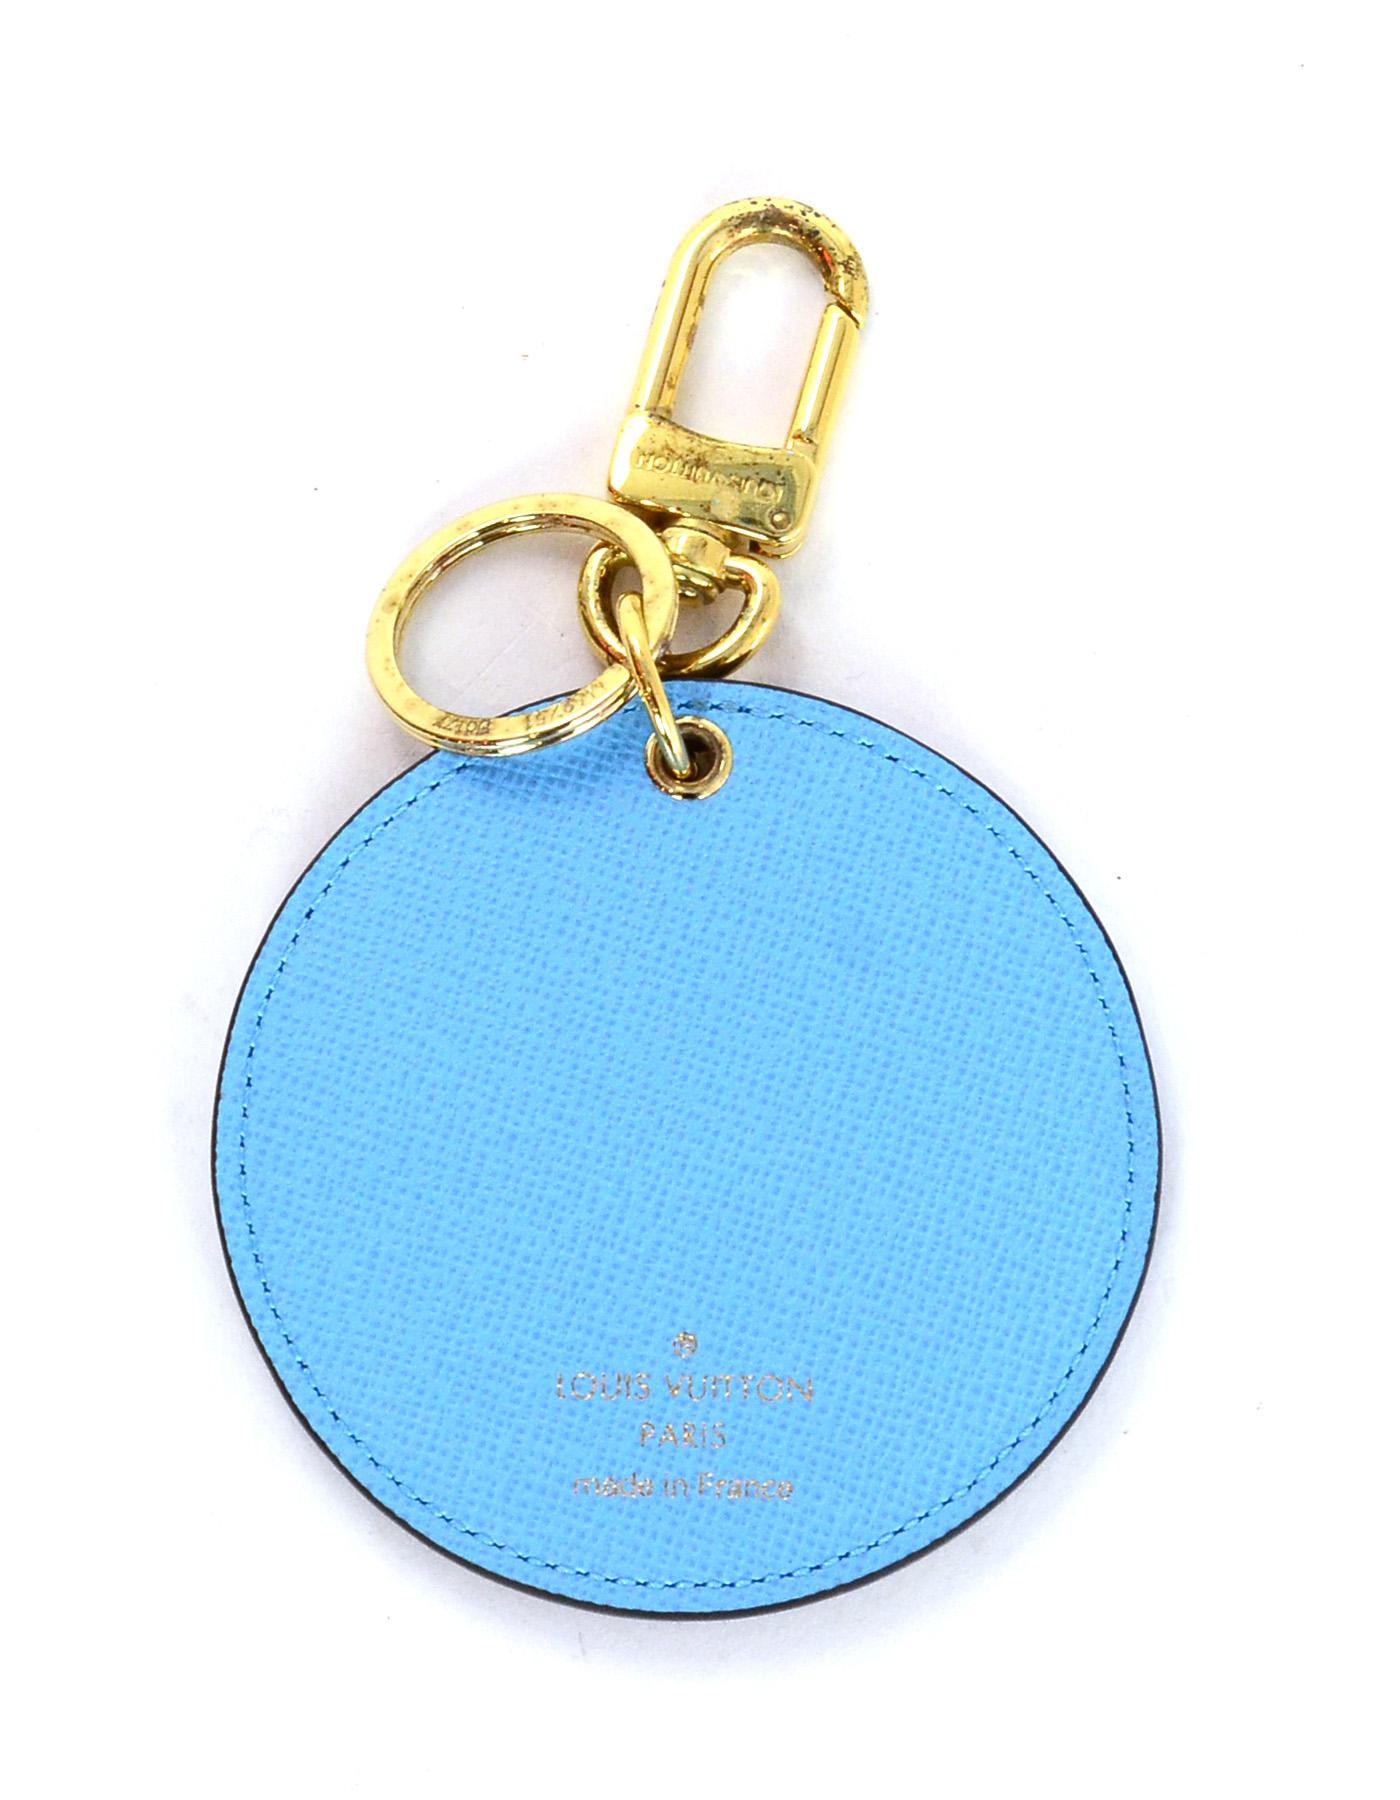 **BAG NOT INCLUDED**
Louis Vuitton Damier Ebene Illustre Manchot Bag Charm Key Ring.  This item was part of Louis Vuitton limited edition 2017 Christmas collection and features penguins carrying LV trunks and purses

Color: Brown, blue 
Materials: